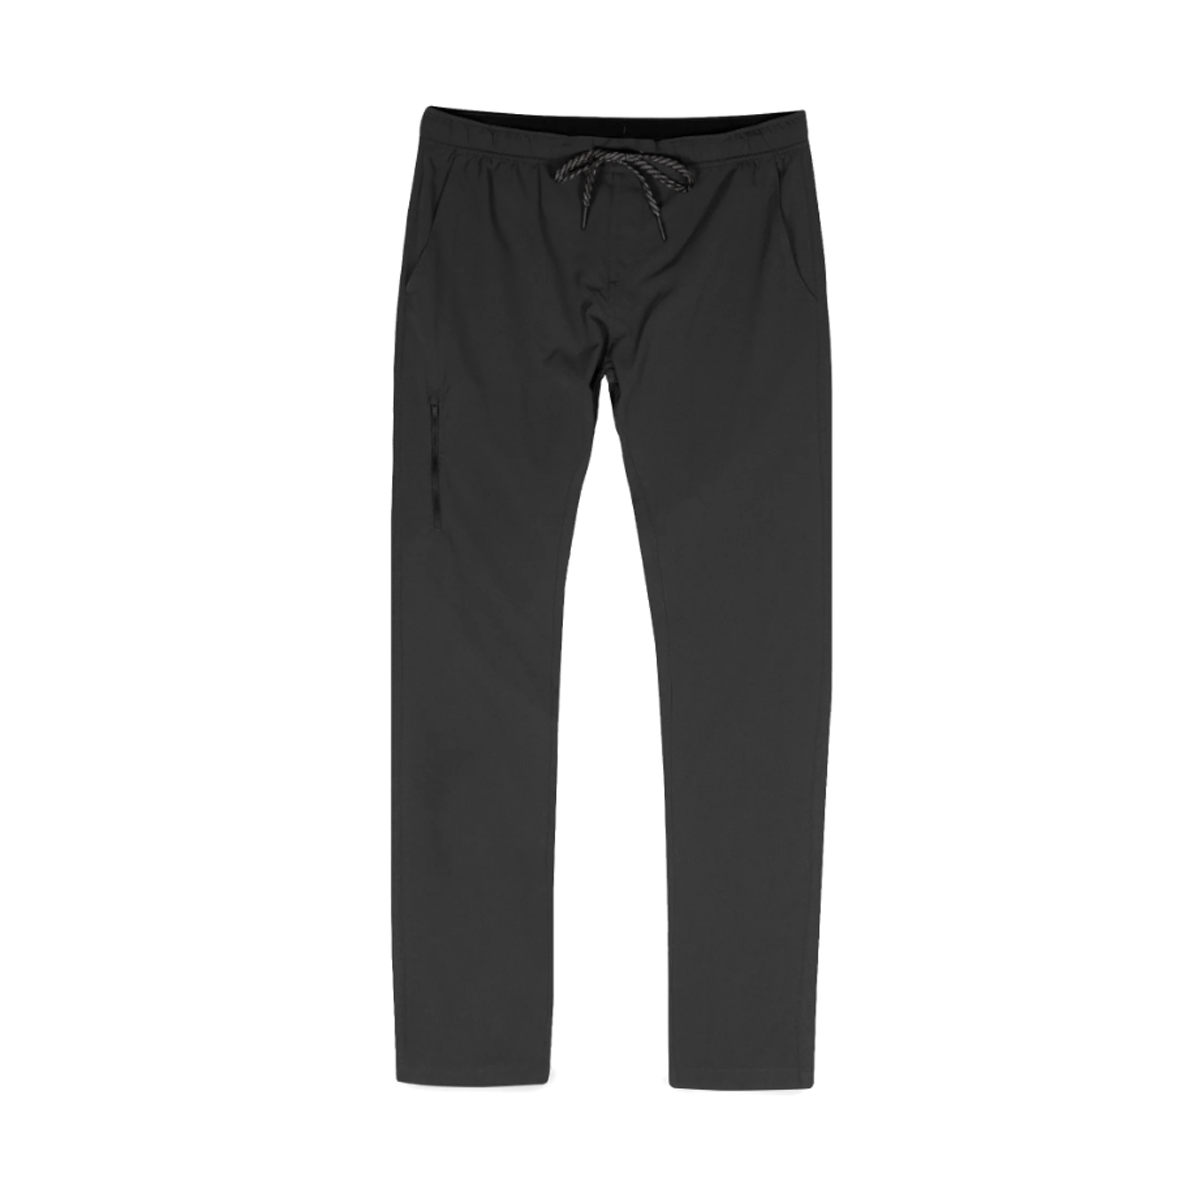 ANETIK Women's Outbound Pant in Black - BoardCo